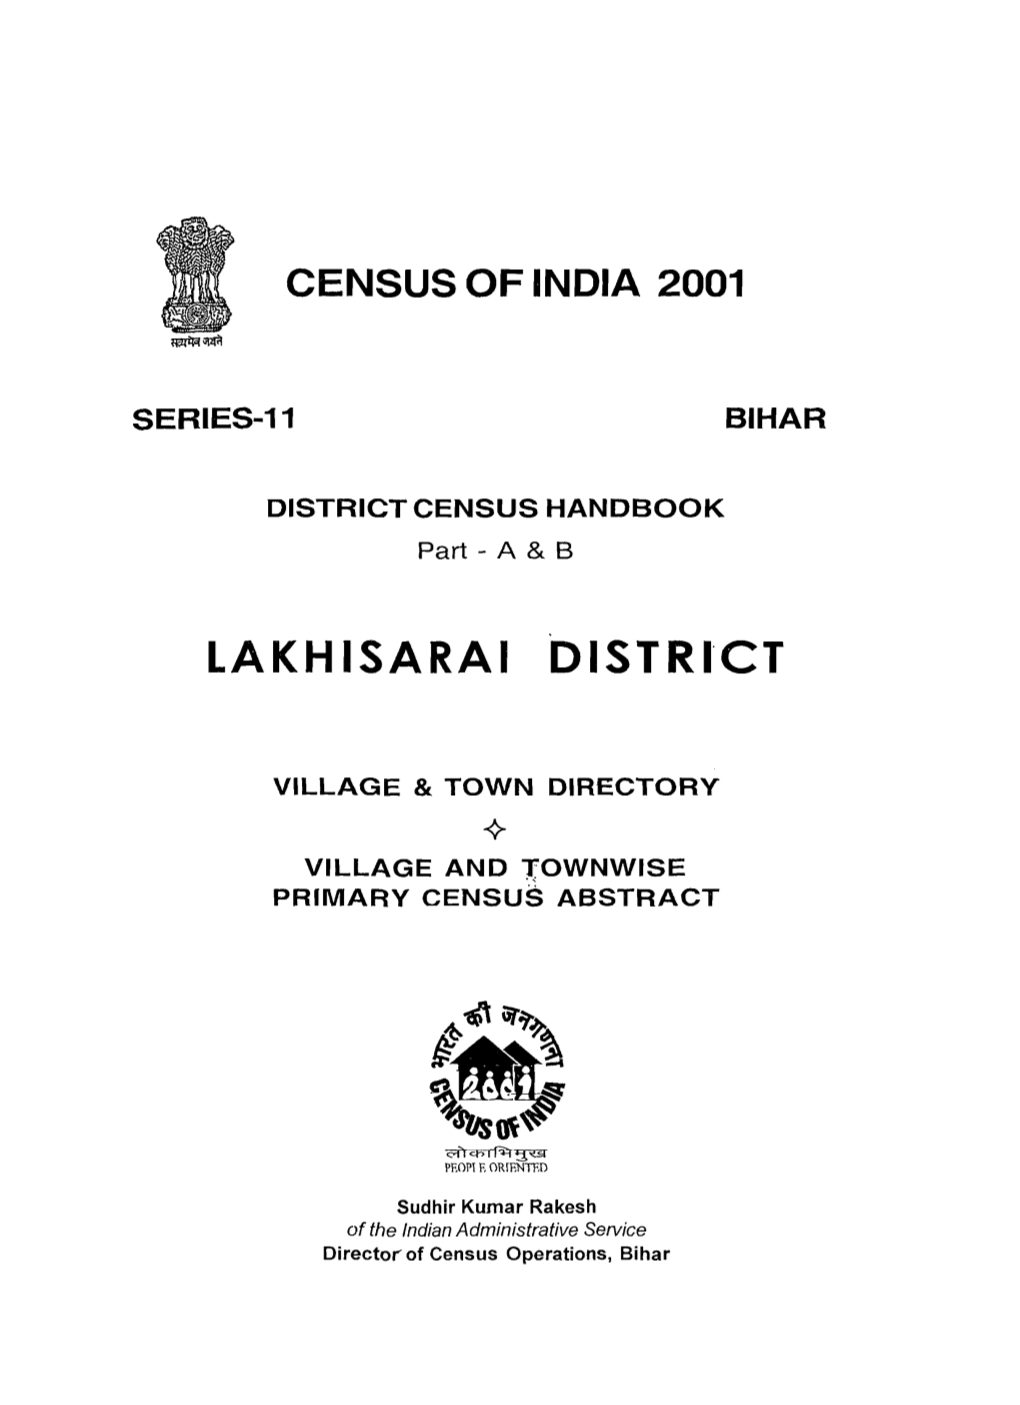 Village and Townwise Primary Census Abstract, Lakhisarai District